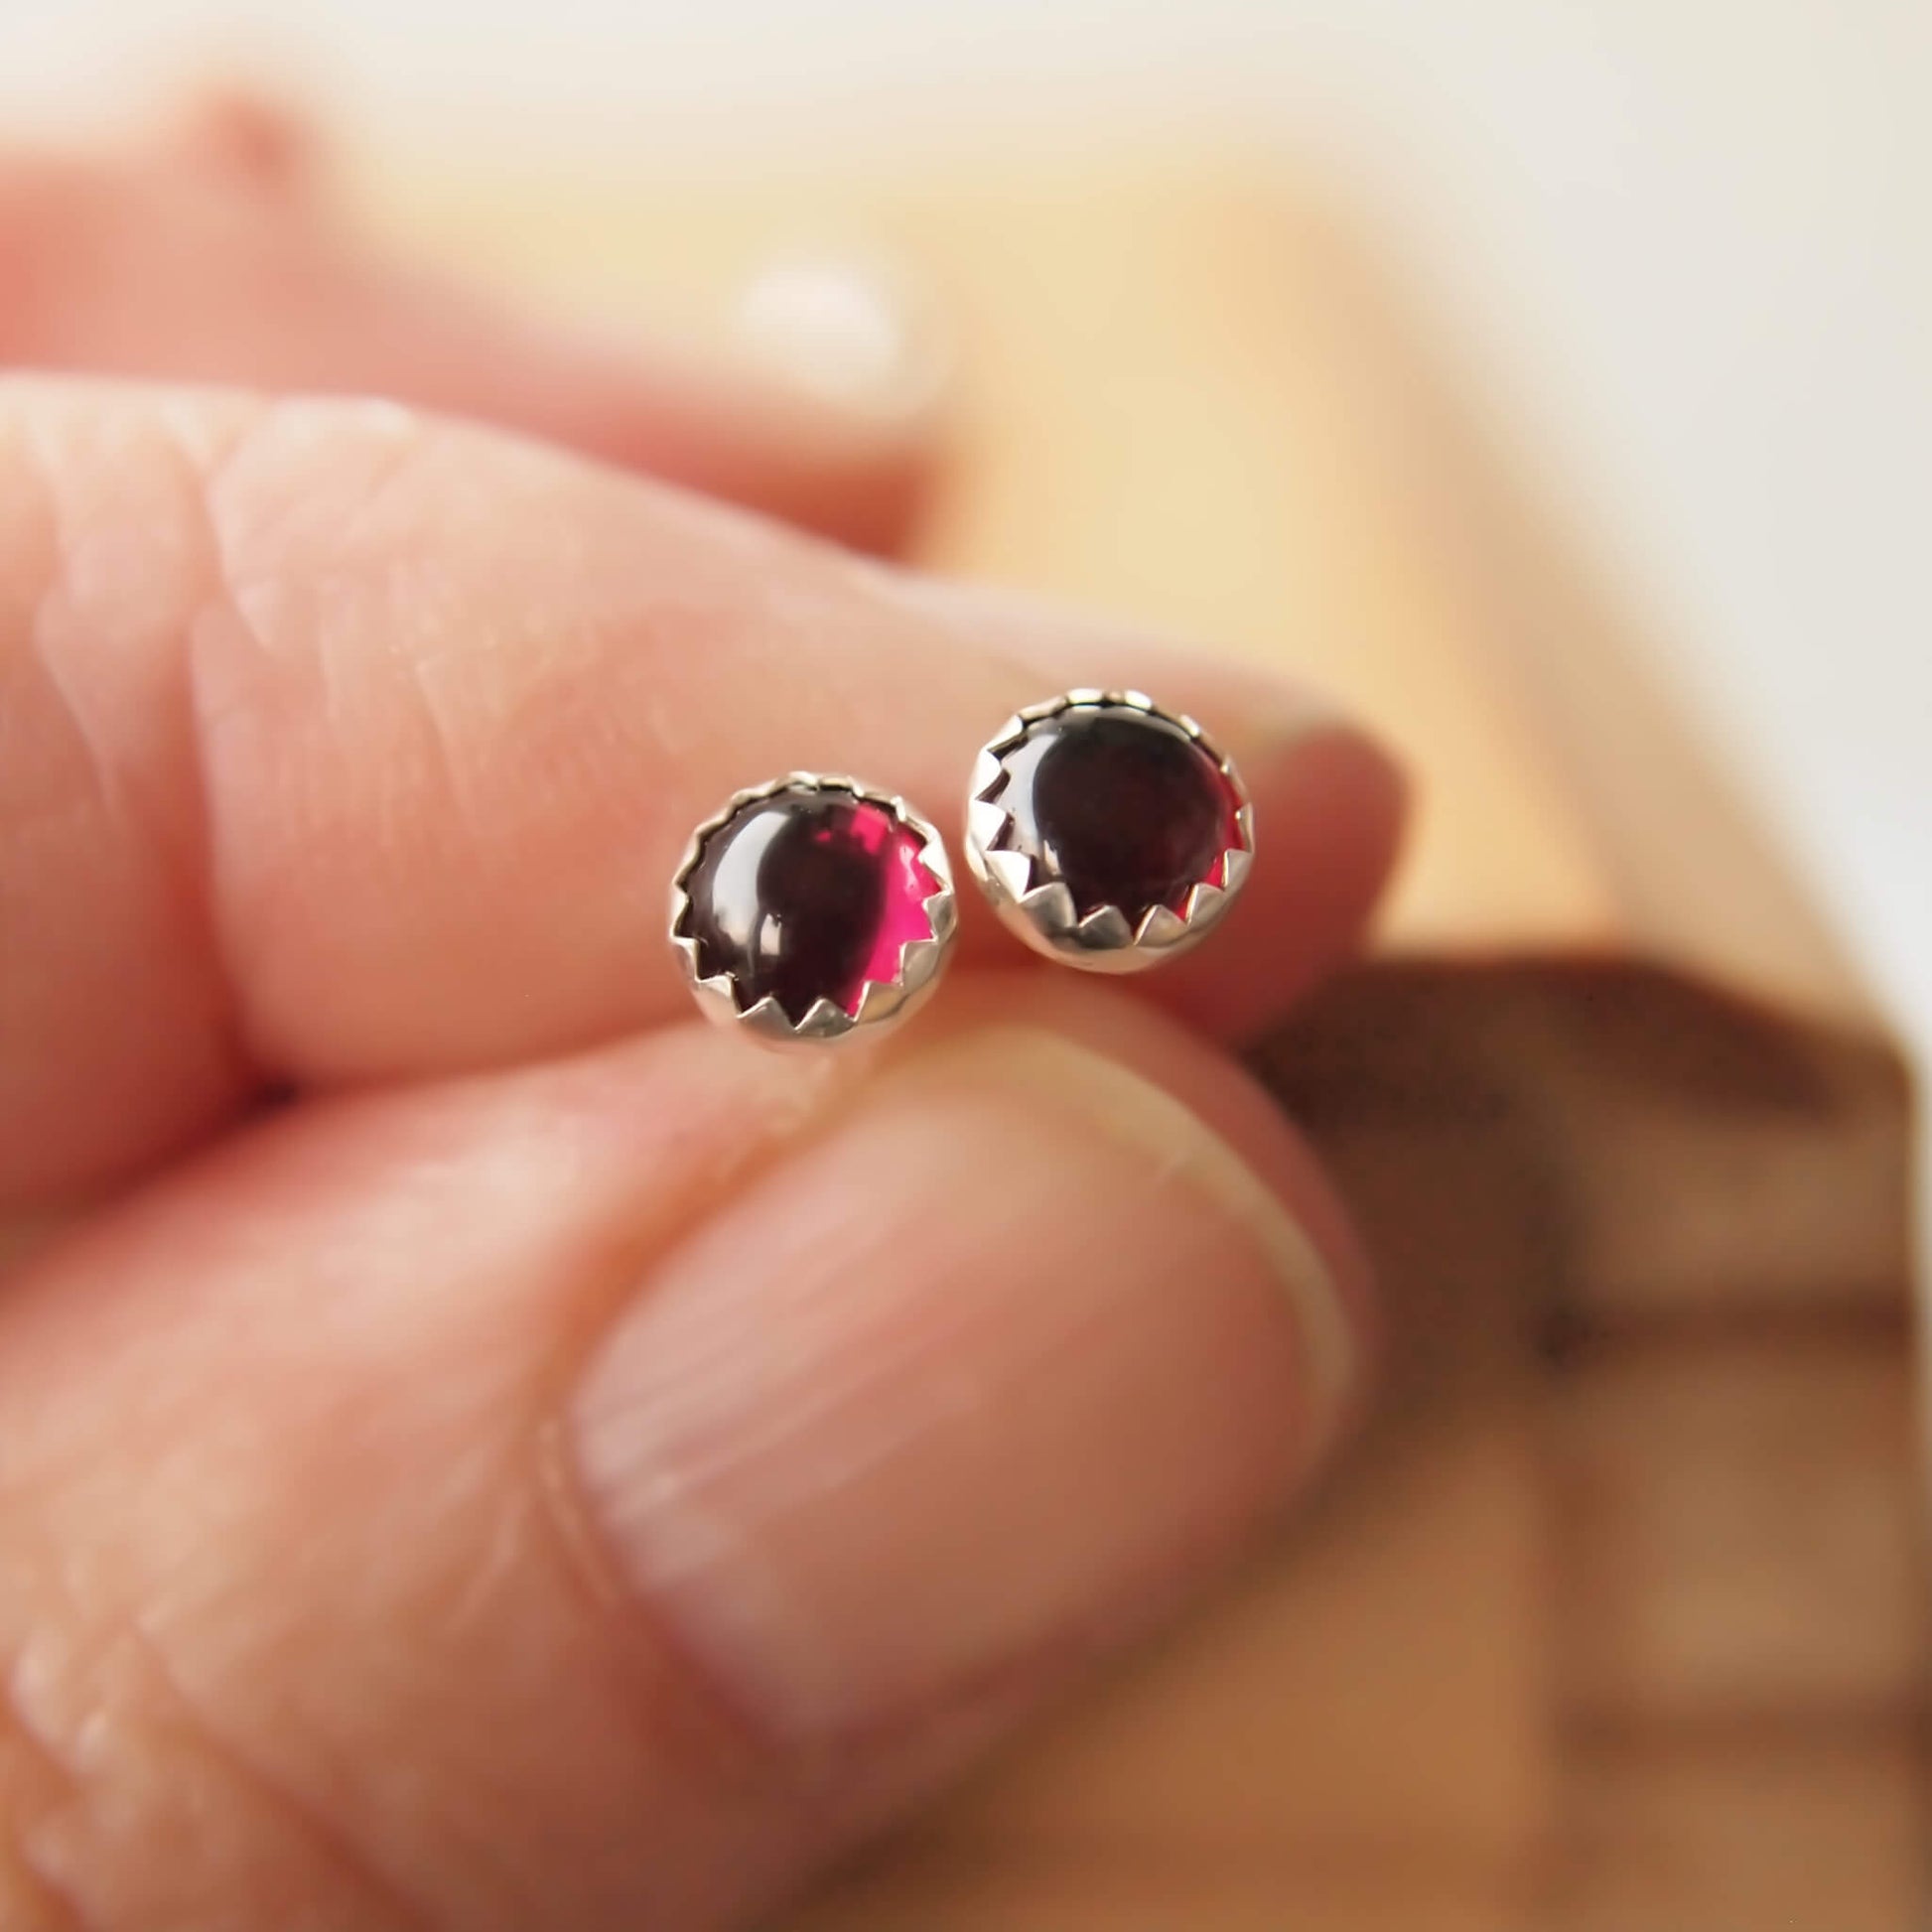 Small Gemstone studs made by maram jewellery in Scotland UK. The earrings are handcrafted from Sterling Silver, simple in design and have a matching pair of 5mm round garnets, birthstone for January. The earrings are minimalist and modern in design and are shown held in a hand to show scale